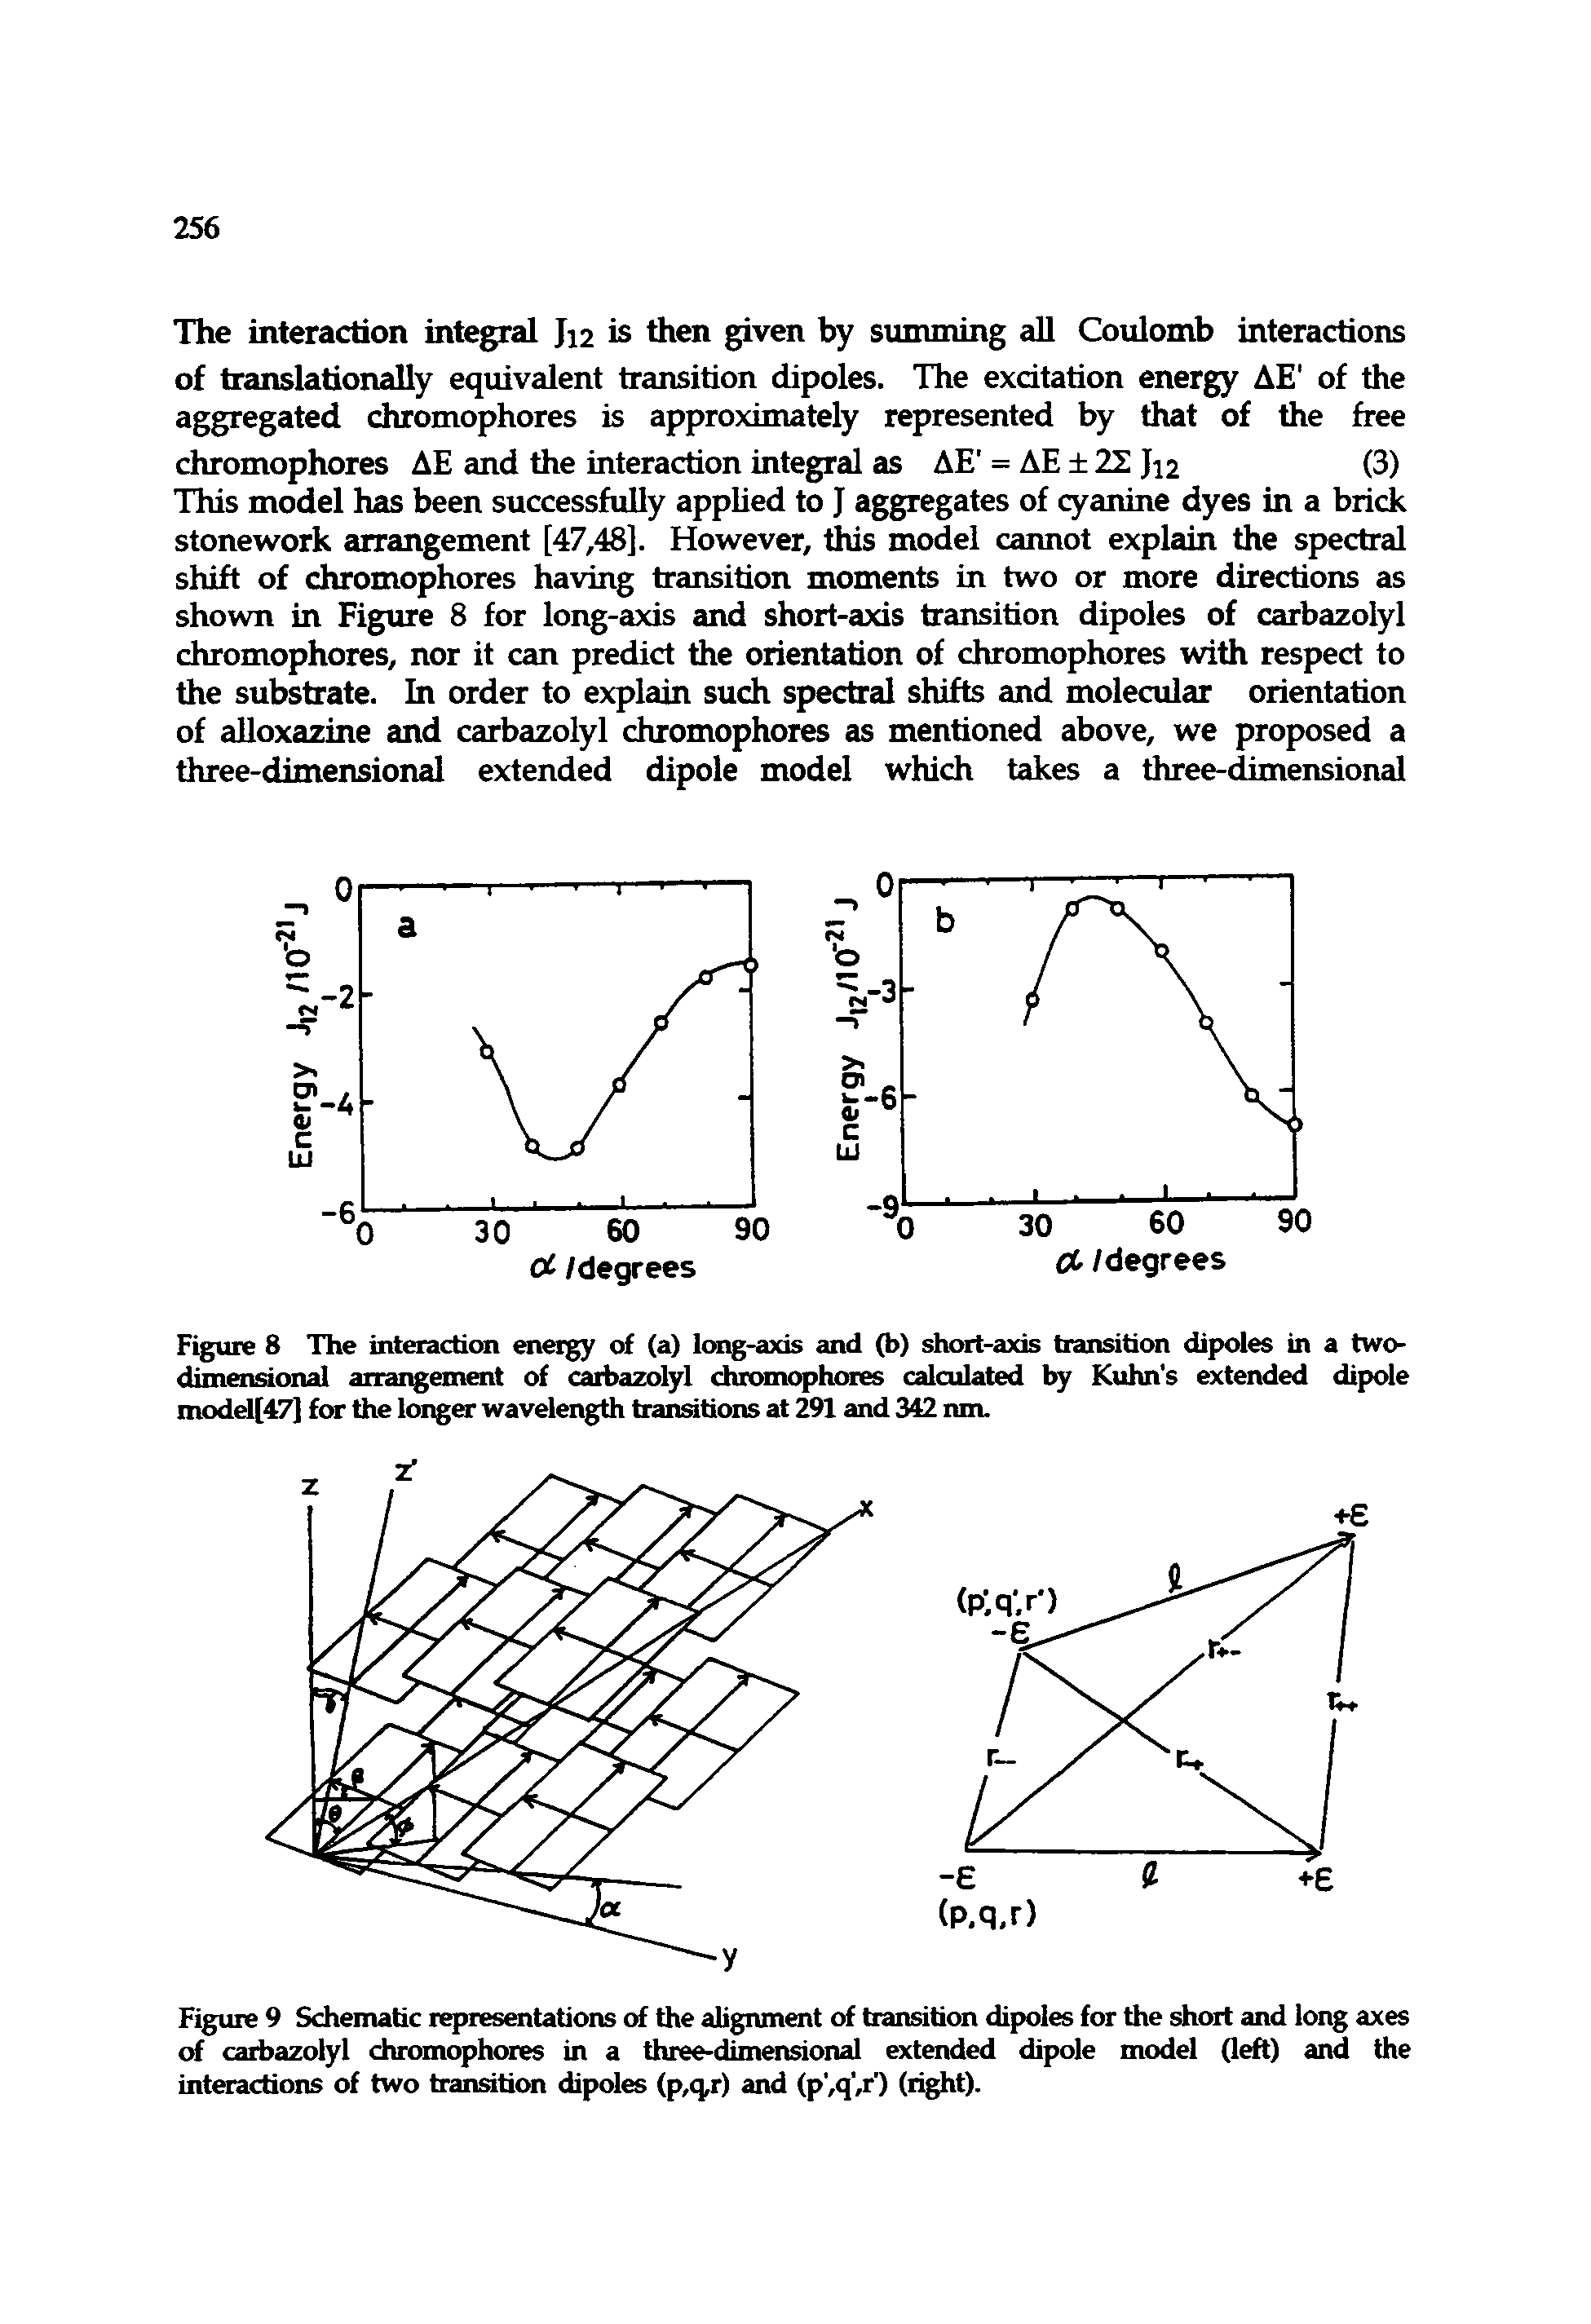 Figure 8 The interaction energy of (a) long-axis and (b) short-axis transition dipoles in a two-dimensional arrangement of carbazolyl chromophores calculated by Kuhn s extended dipole model[47] for the longer wavelength transitions at 291 and 342 nm.